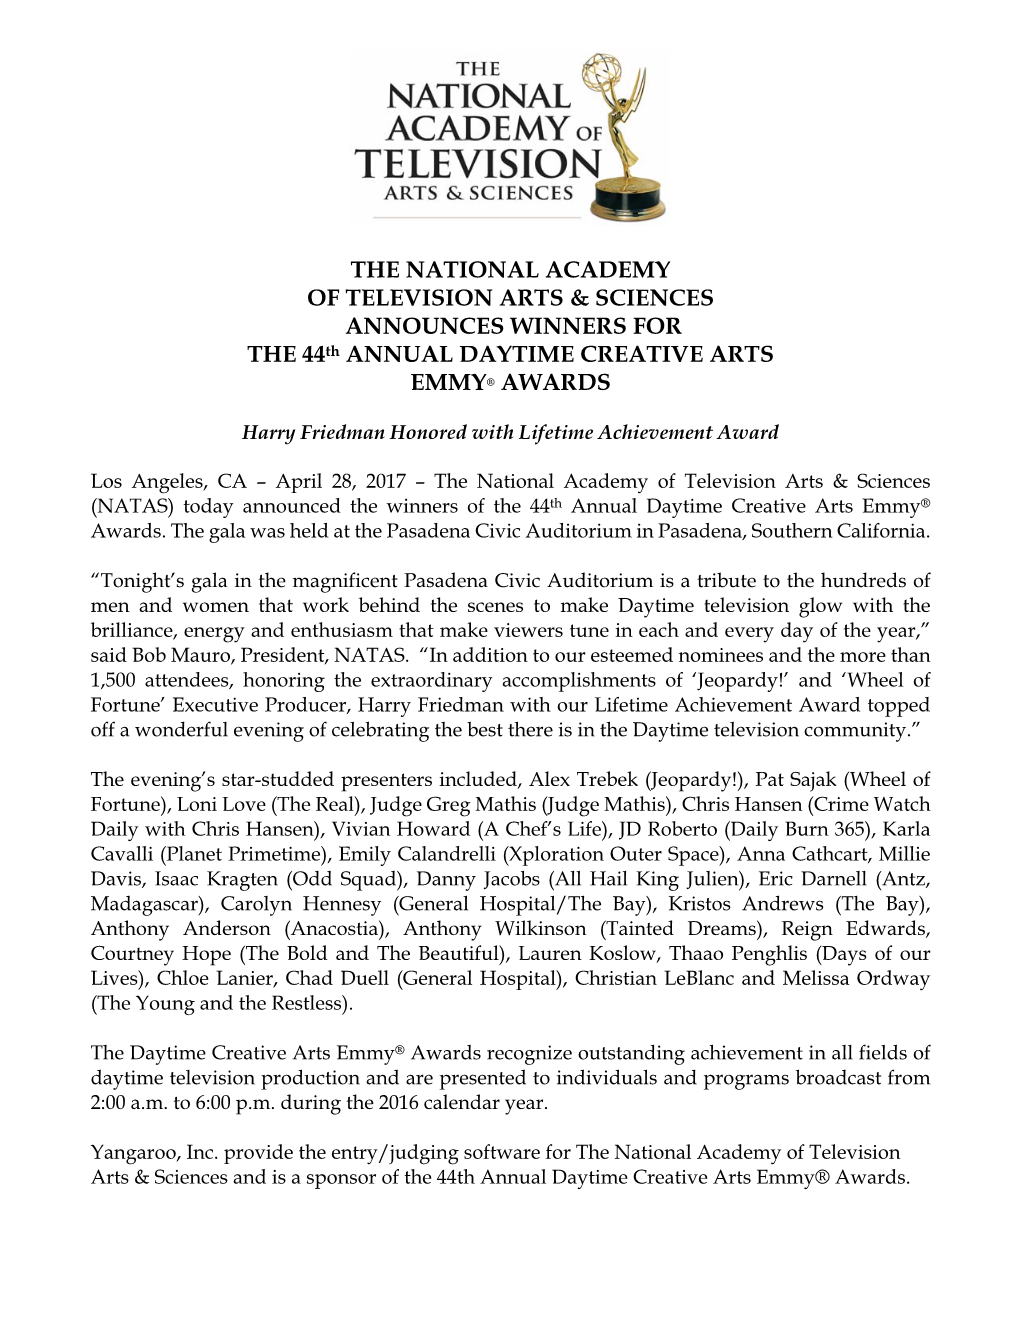 THE NATIONAL ACADEMY of TELEVISION ARTS & SCIENCES ANNOUNCES WINNERS for the 44Th ANNUAL DAYTIME CREATIVE ARTS EMMY® AWARD